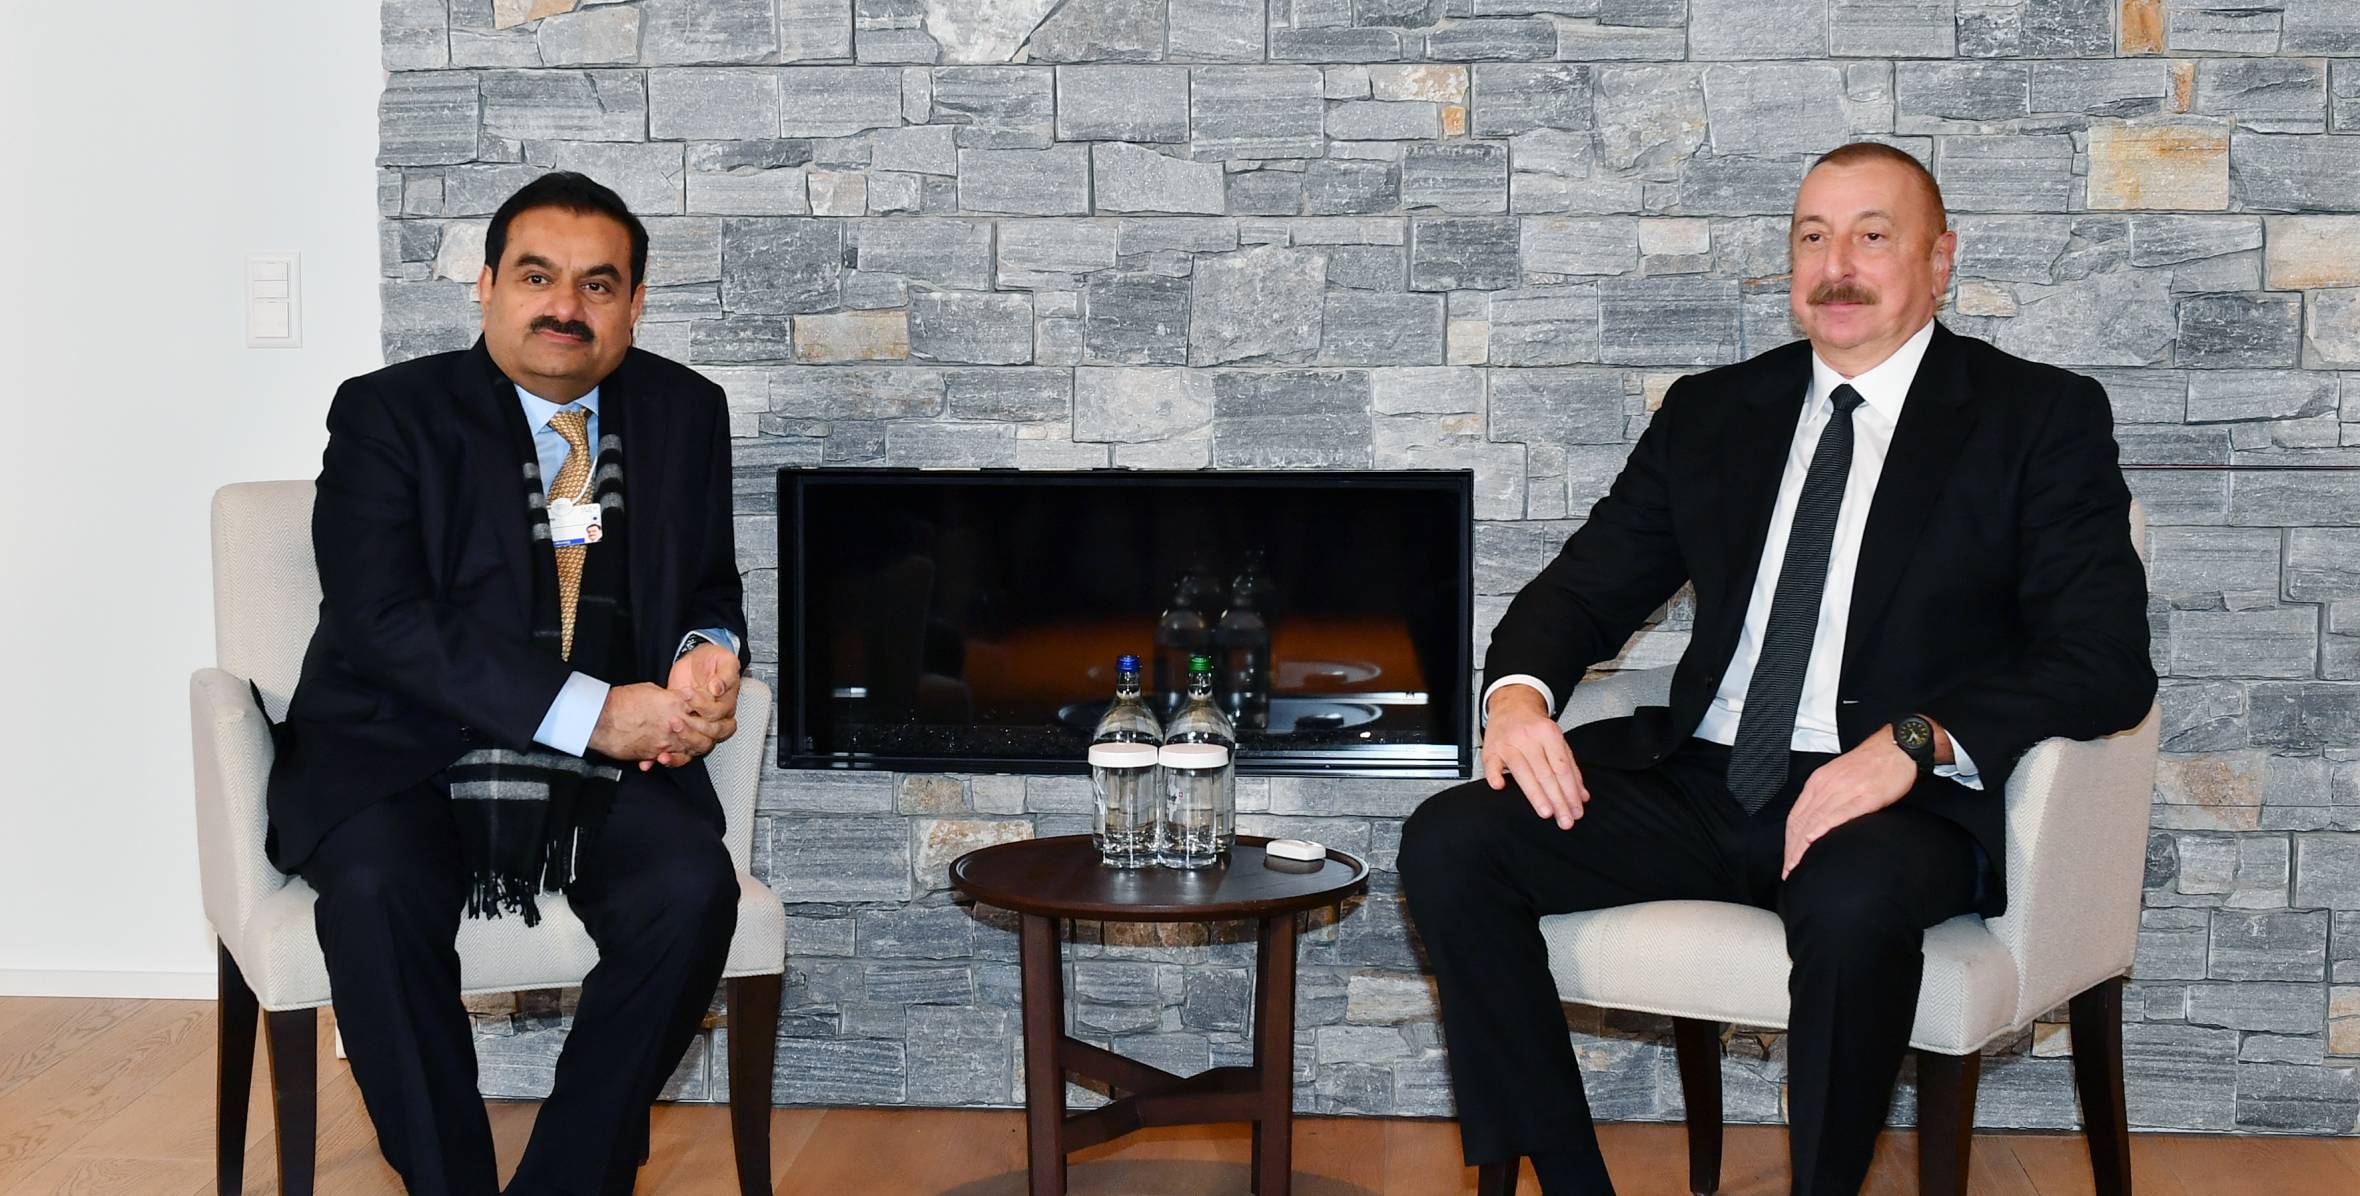 Ilham Aliyev met with Founder and Chairman of Adani Group in Davos